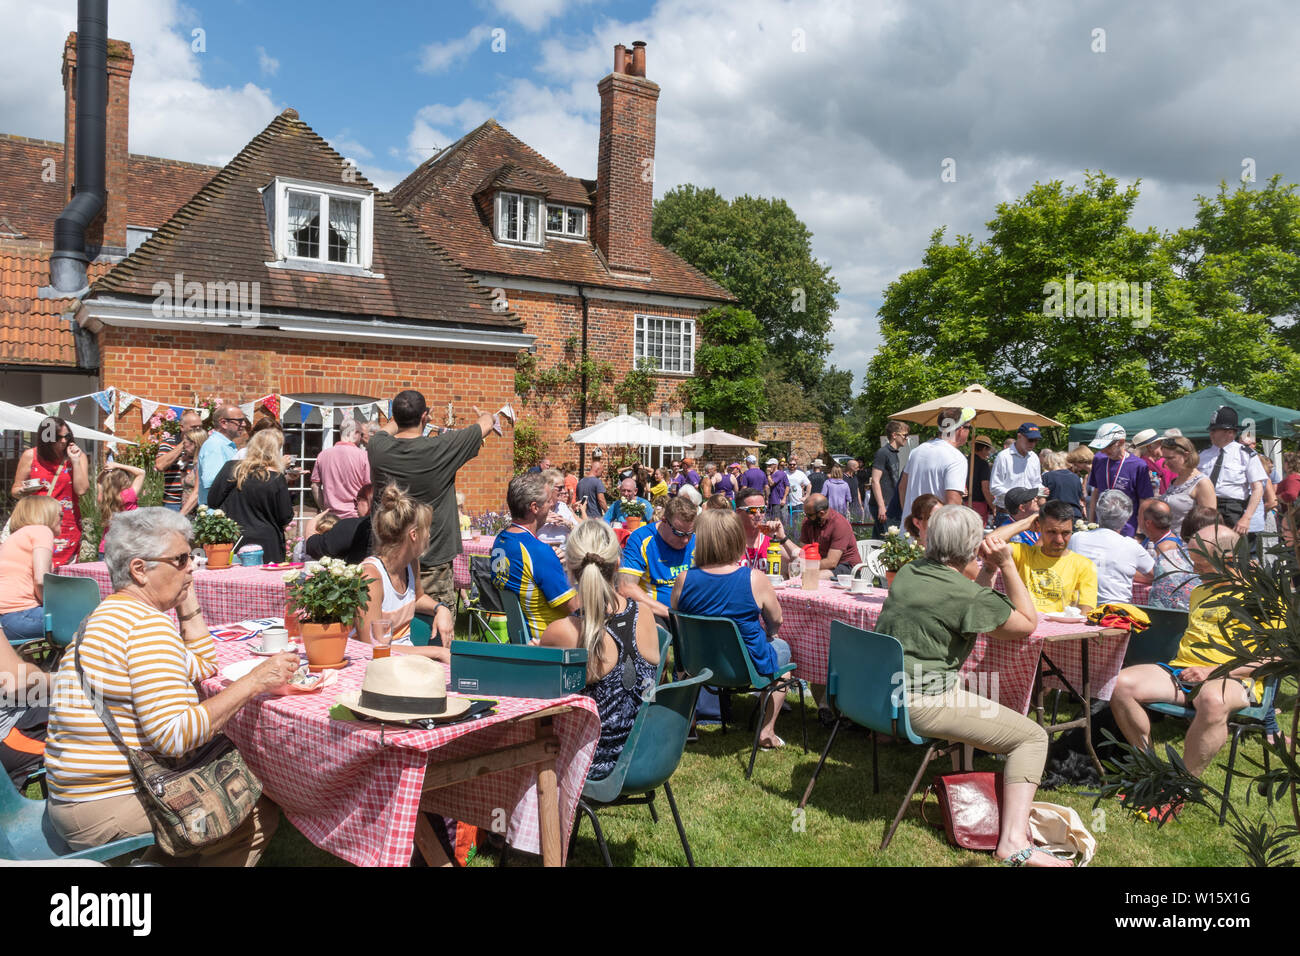 Lots of people enjoying teas, stalls and entertainment at an English village summer fete (fayre) on a sunny day in June Stock Photo